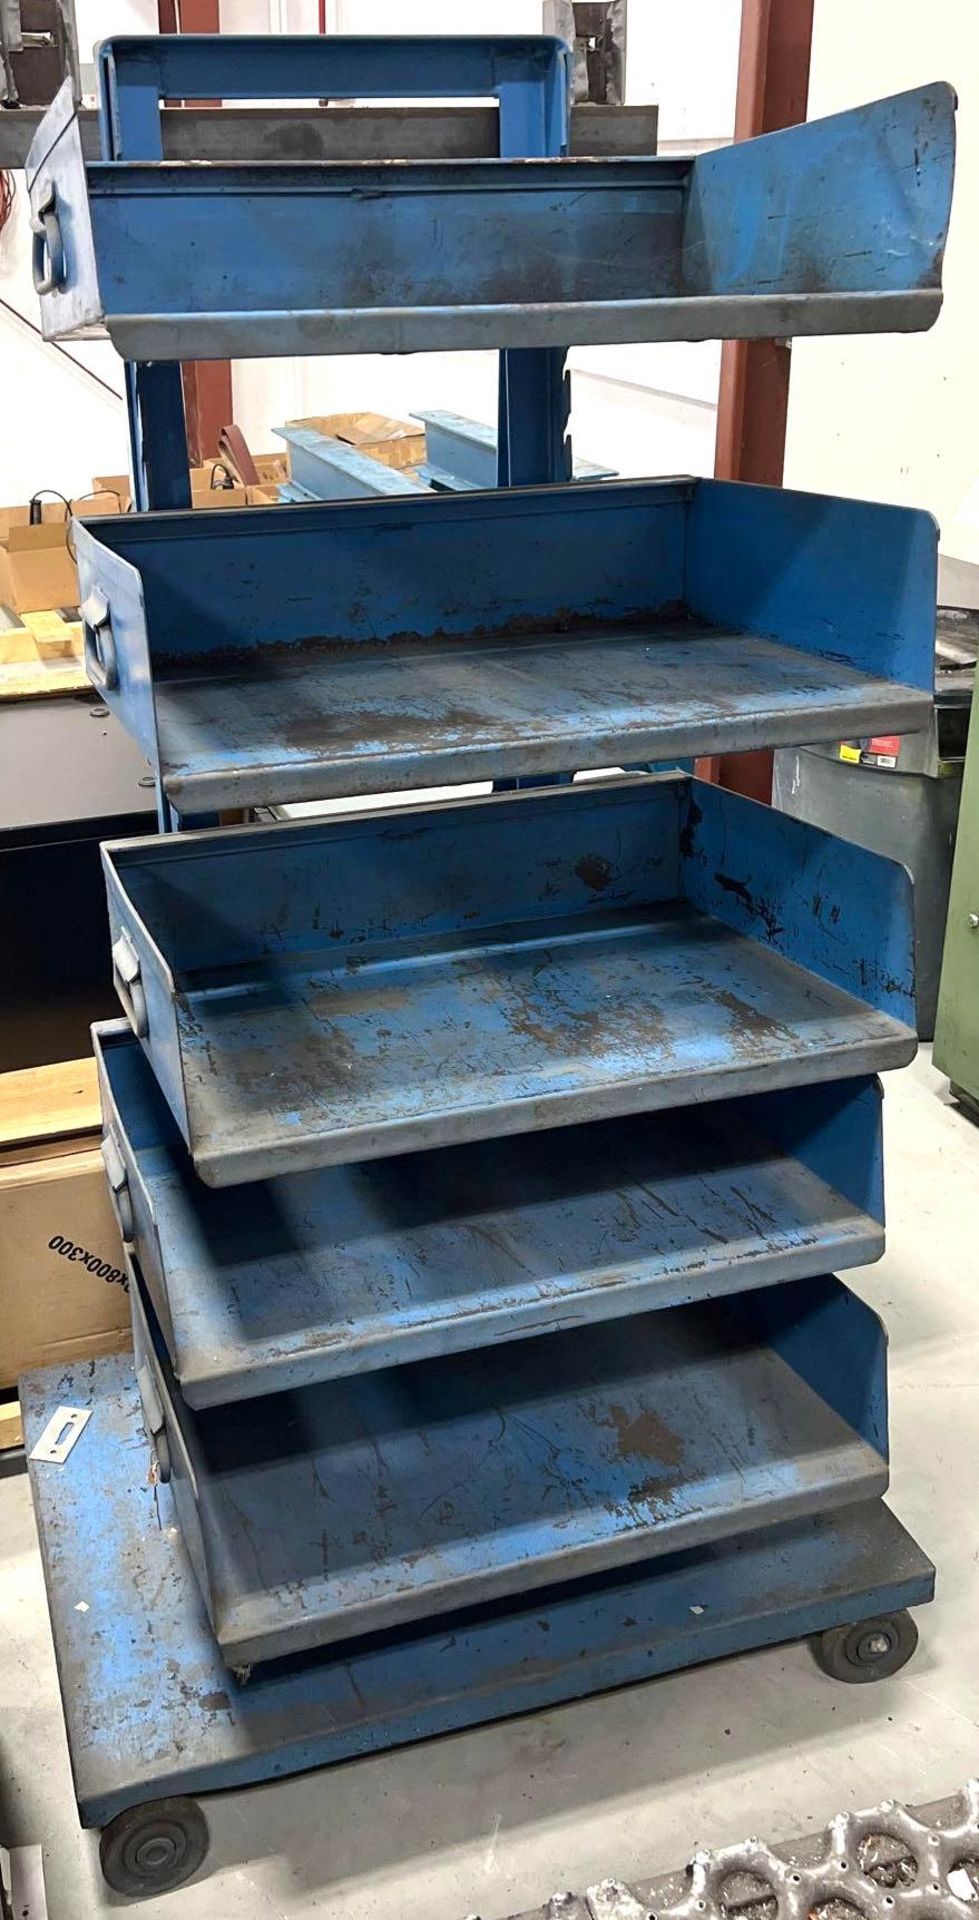 Steel Roll-a-Round Shop Storage Cart with Adjustable Trays - Image 4 of 4